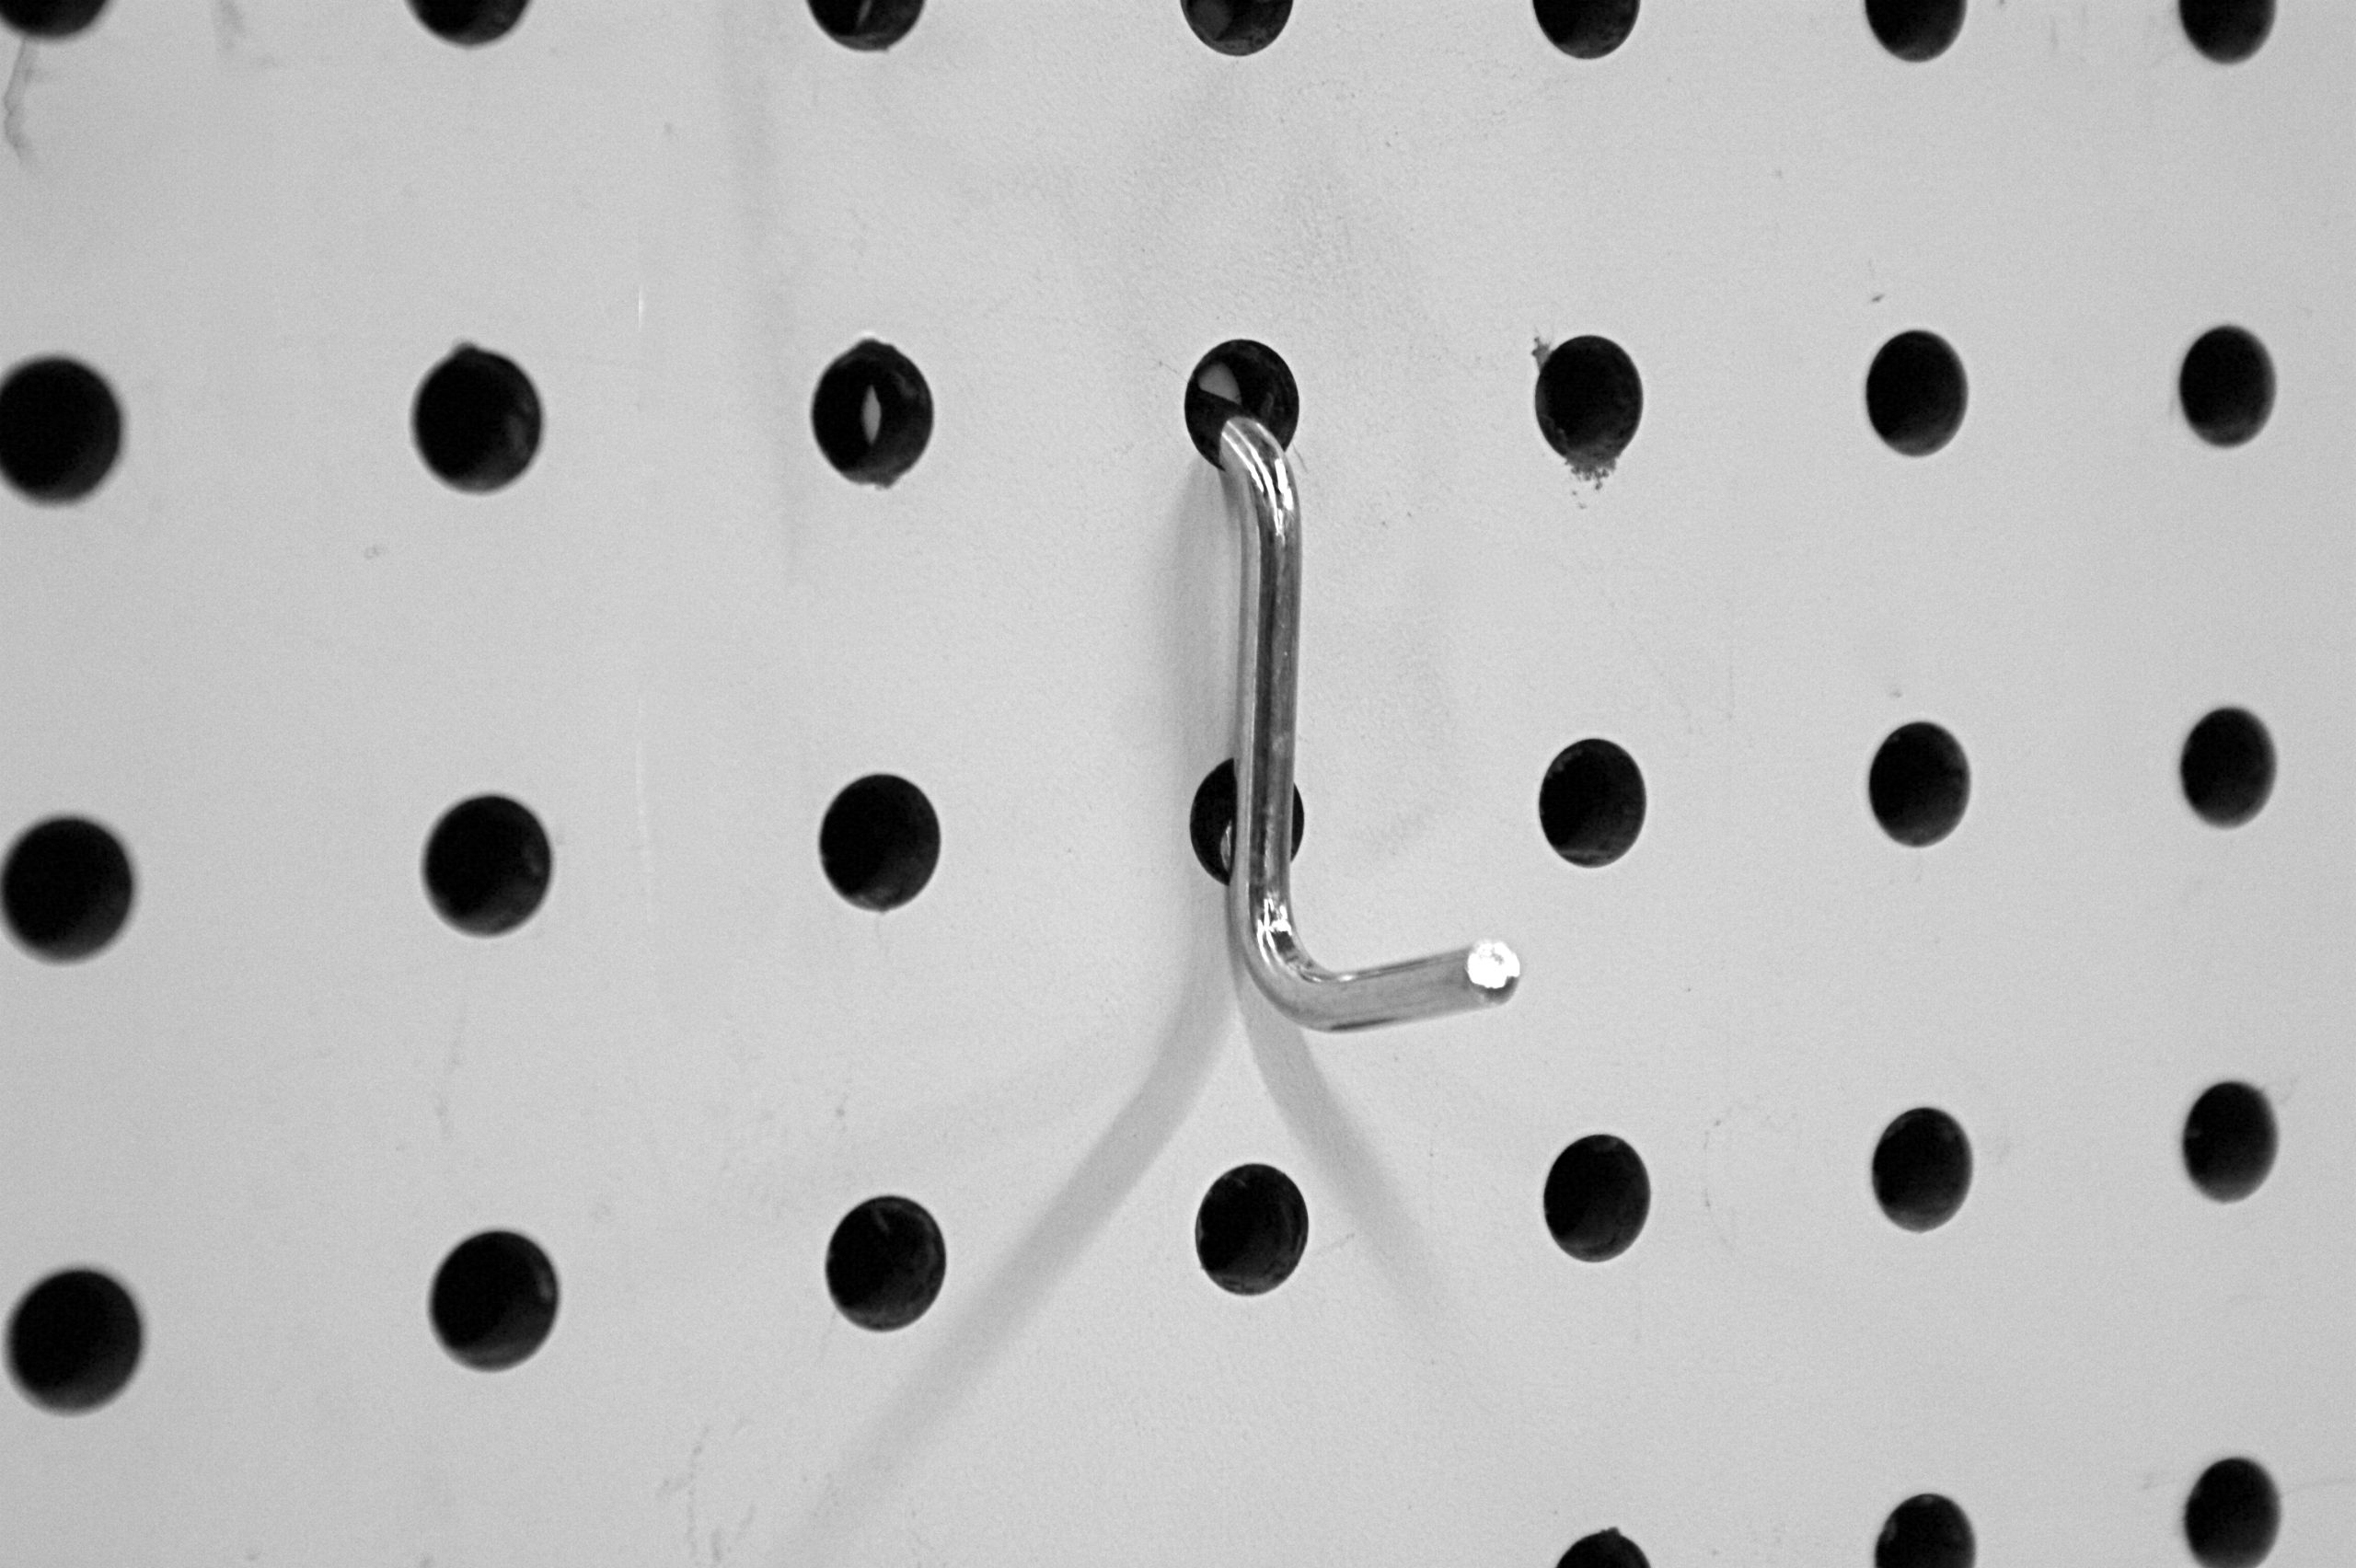 PEGBOARD L-HOOK 1.5 - Detroit Store Fixture Co.  Custom made slatwall and  slatwall units made in the USA